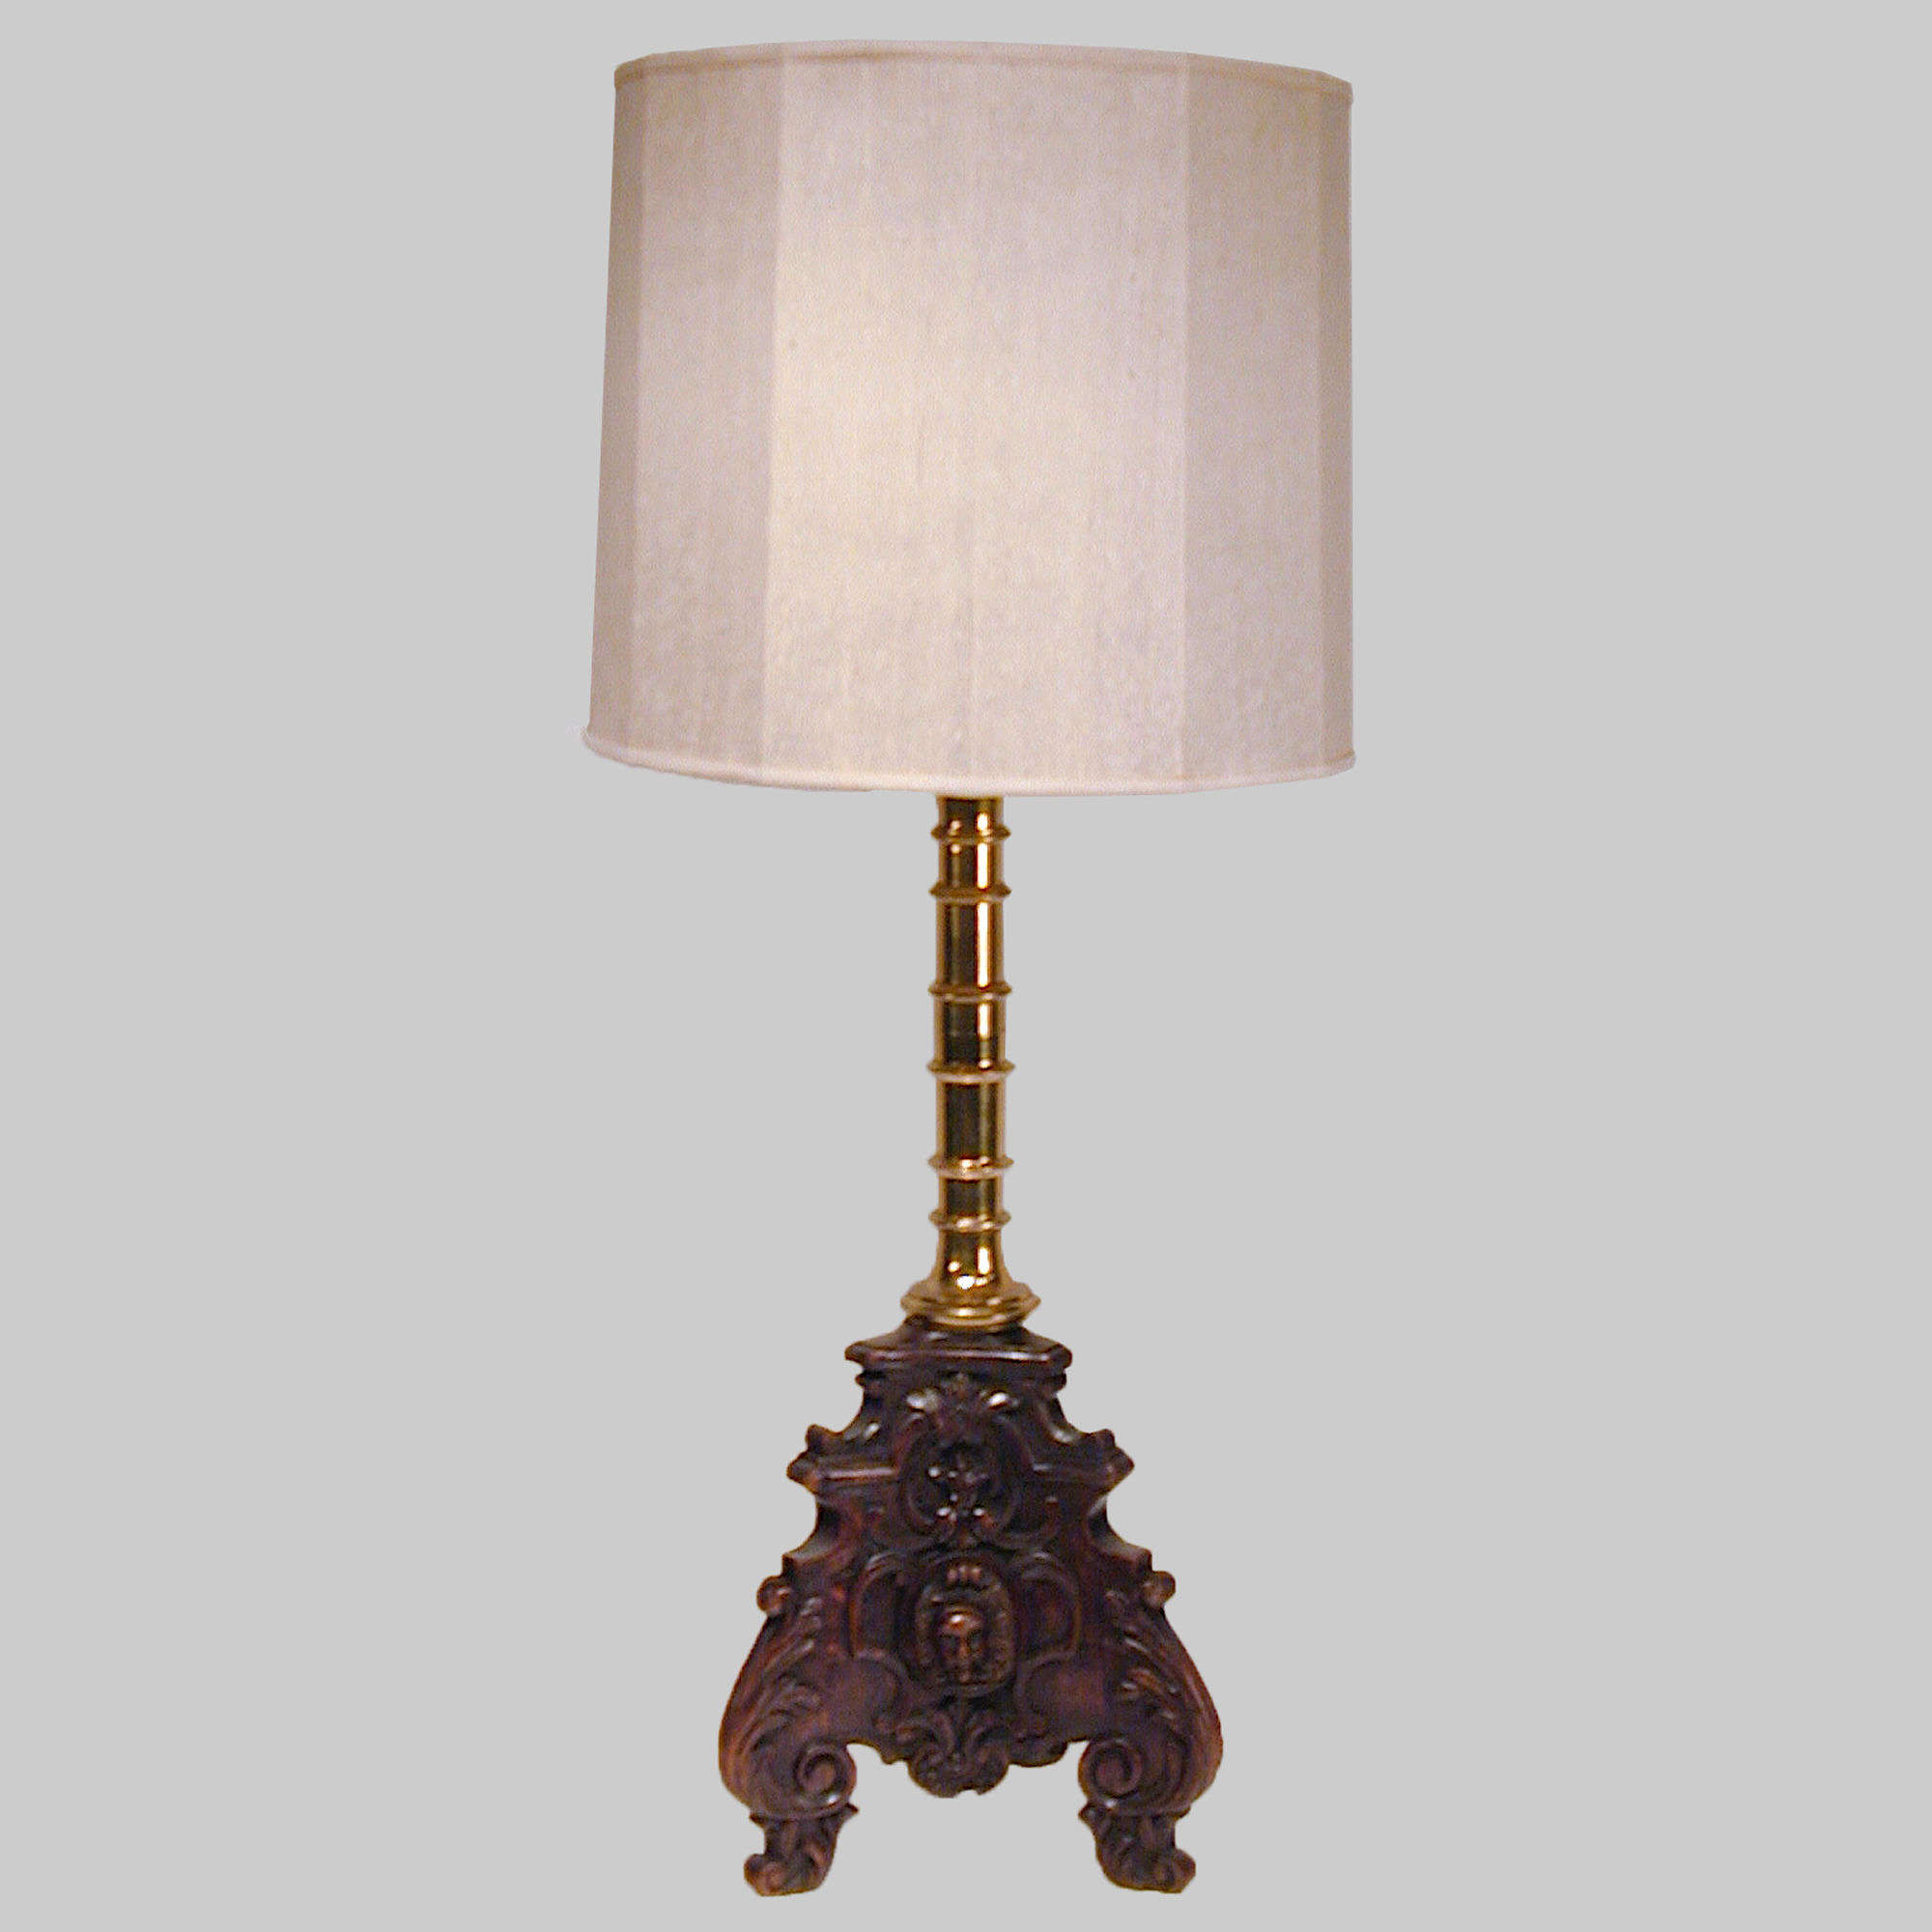 Oak and brass table lamp